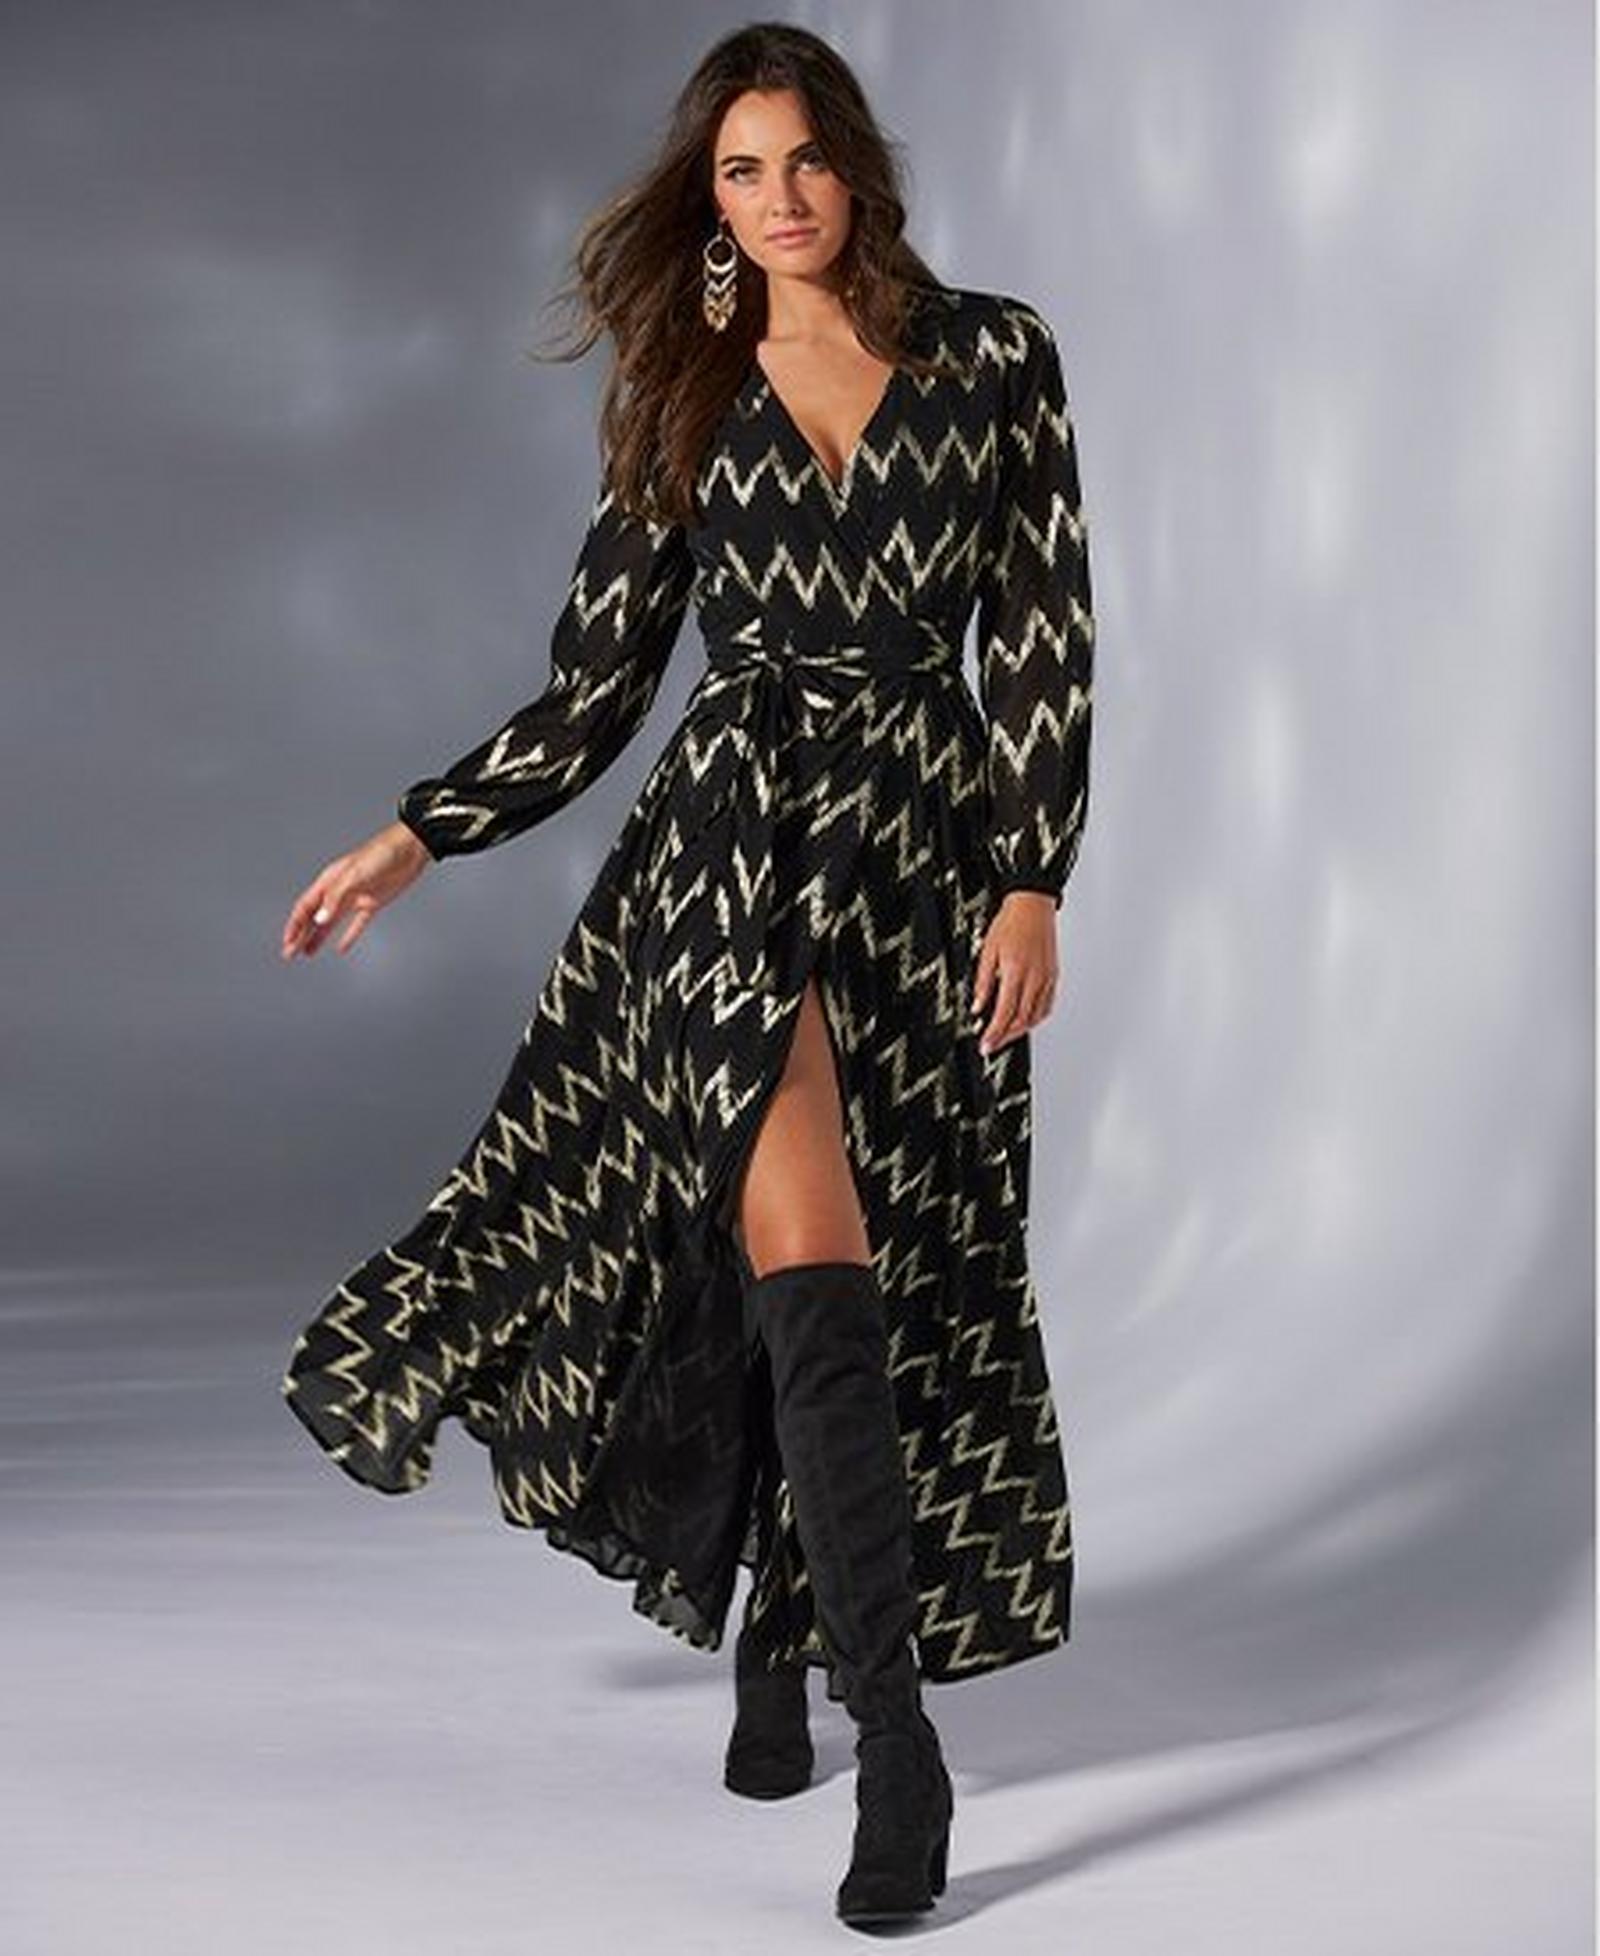 model wearing a black and gold chevron long-sleeve wrap maxi dress and black over-the-knee suede boots.